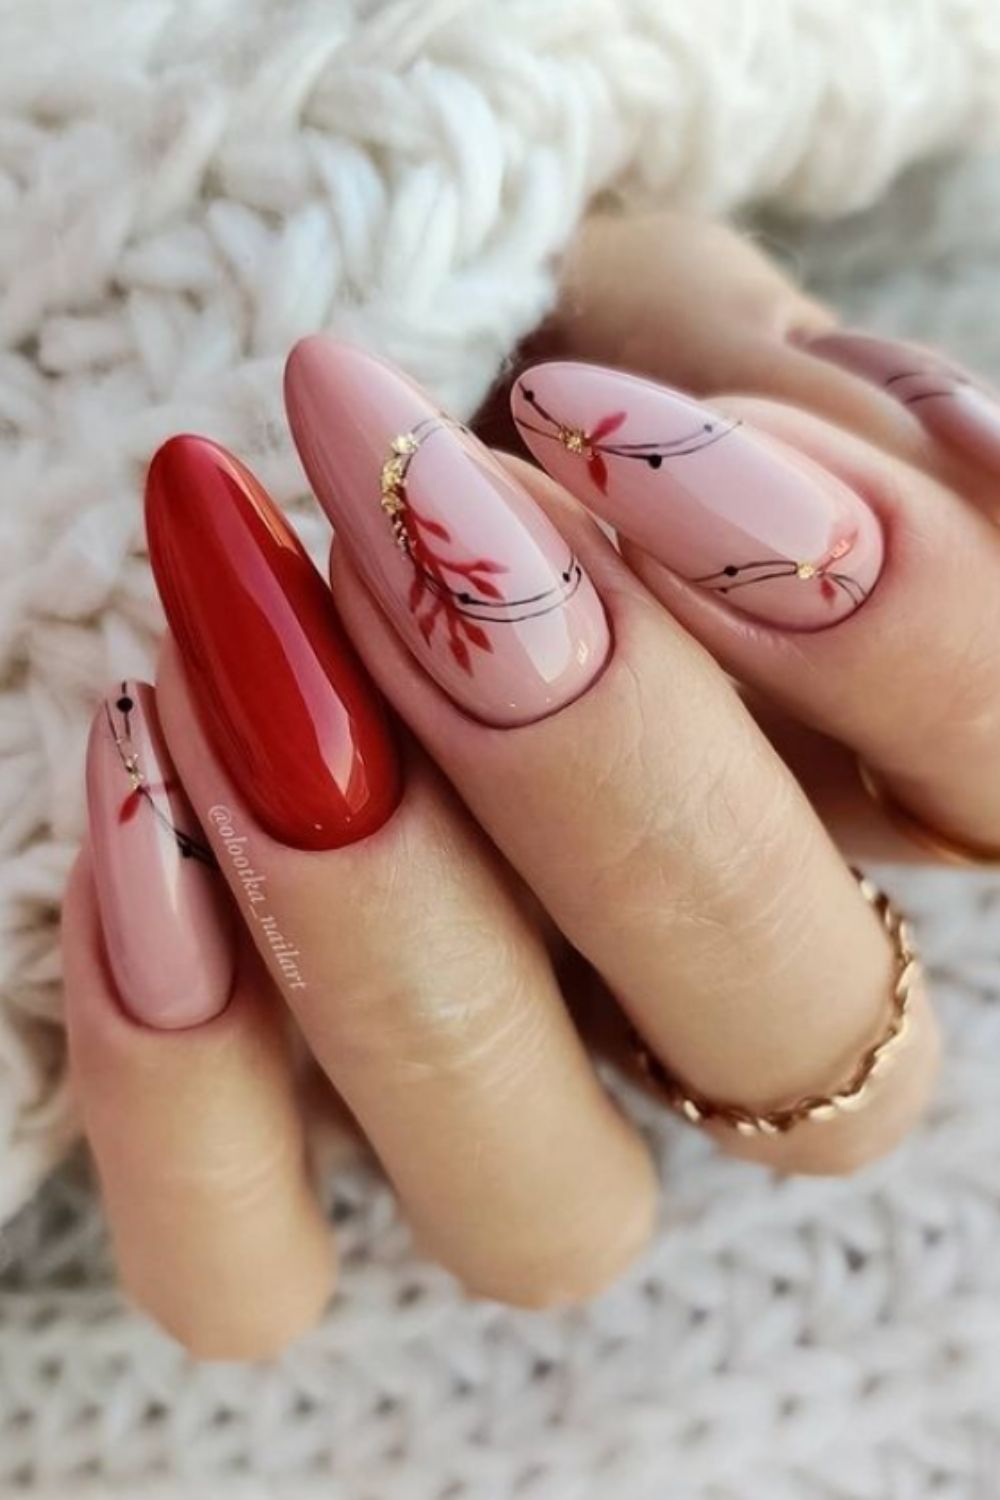 Red and pink nails 